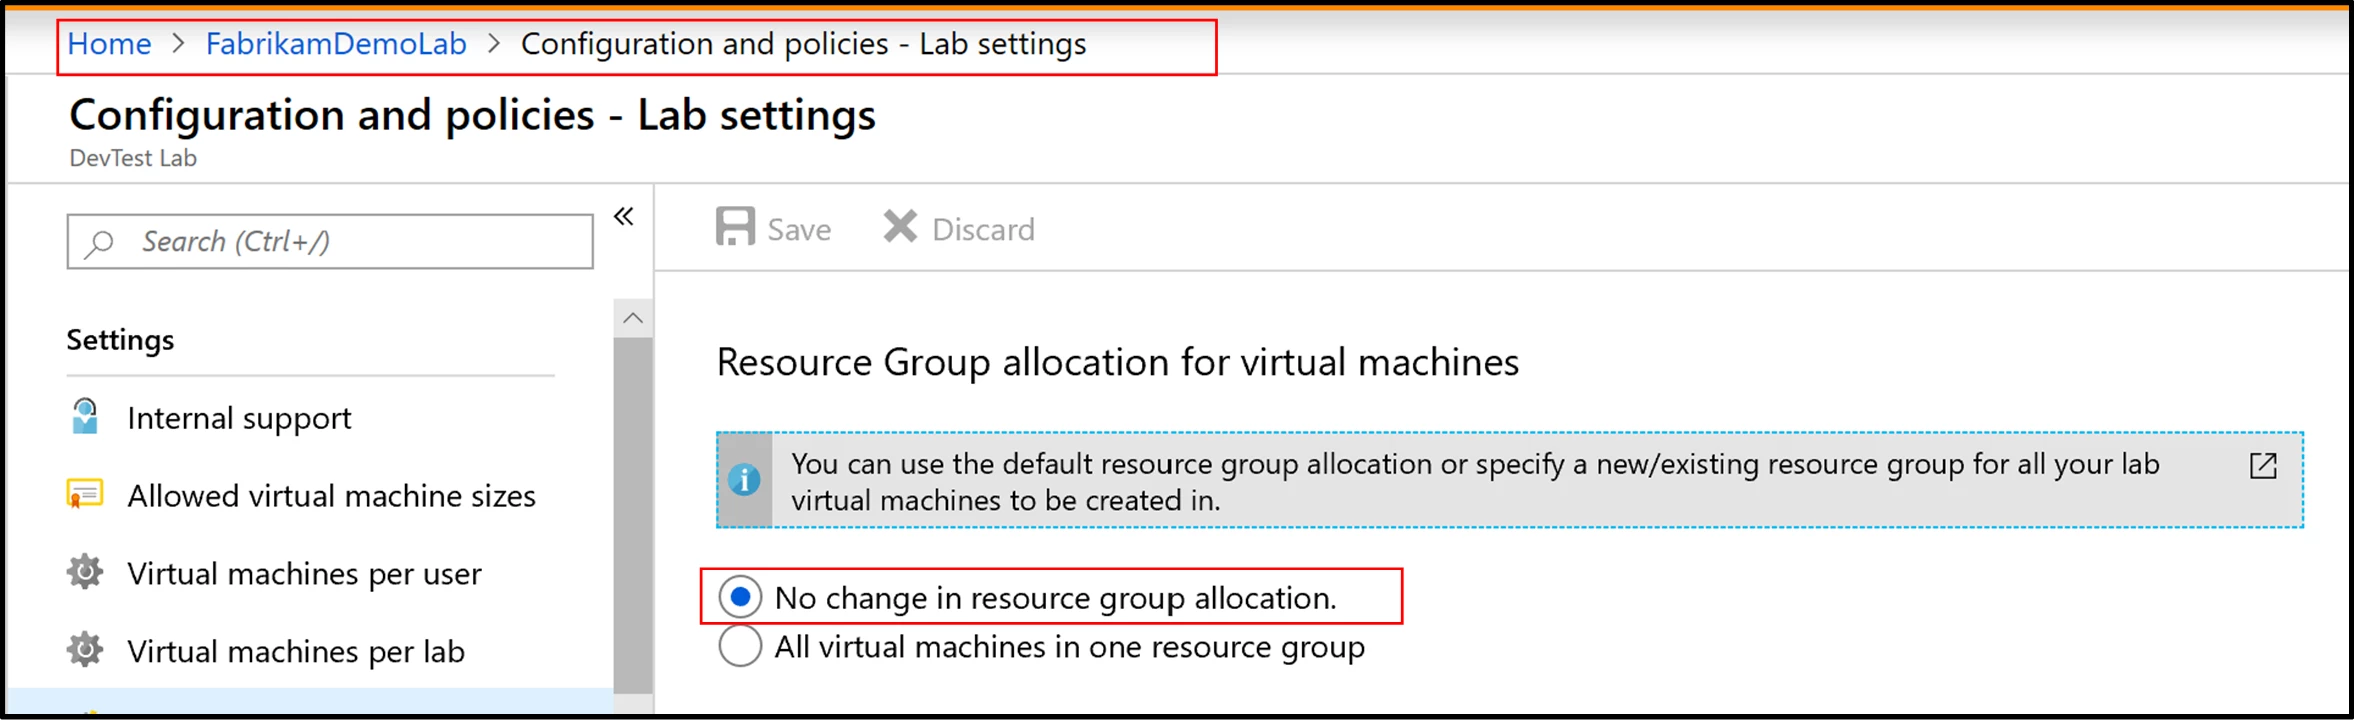 Screenshot of Resource Group allocation for virtual machines